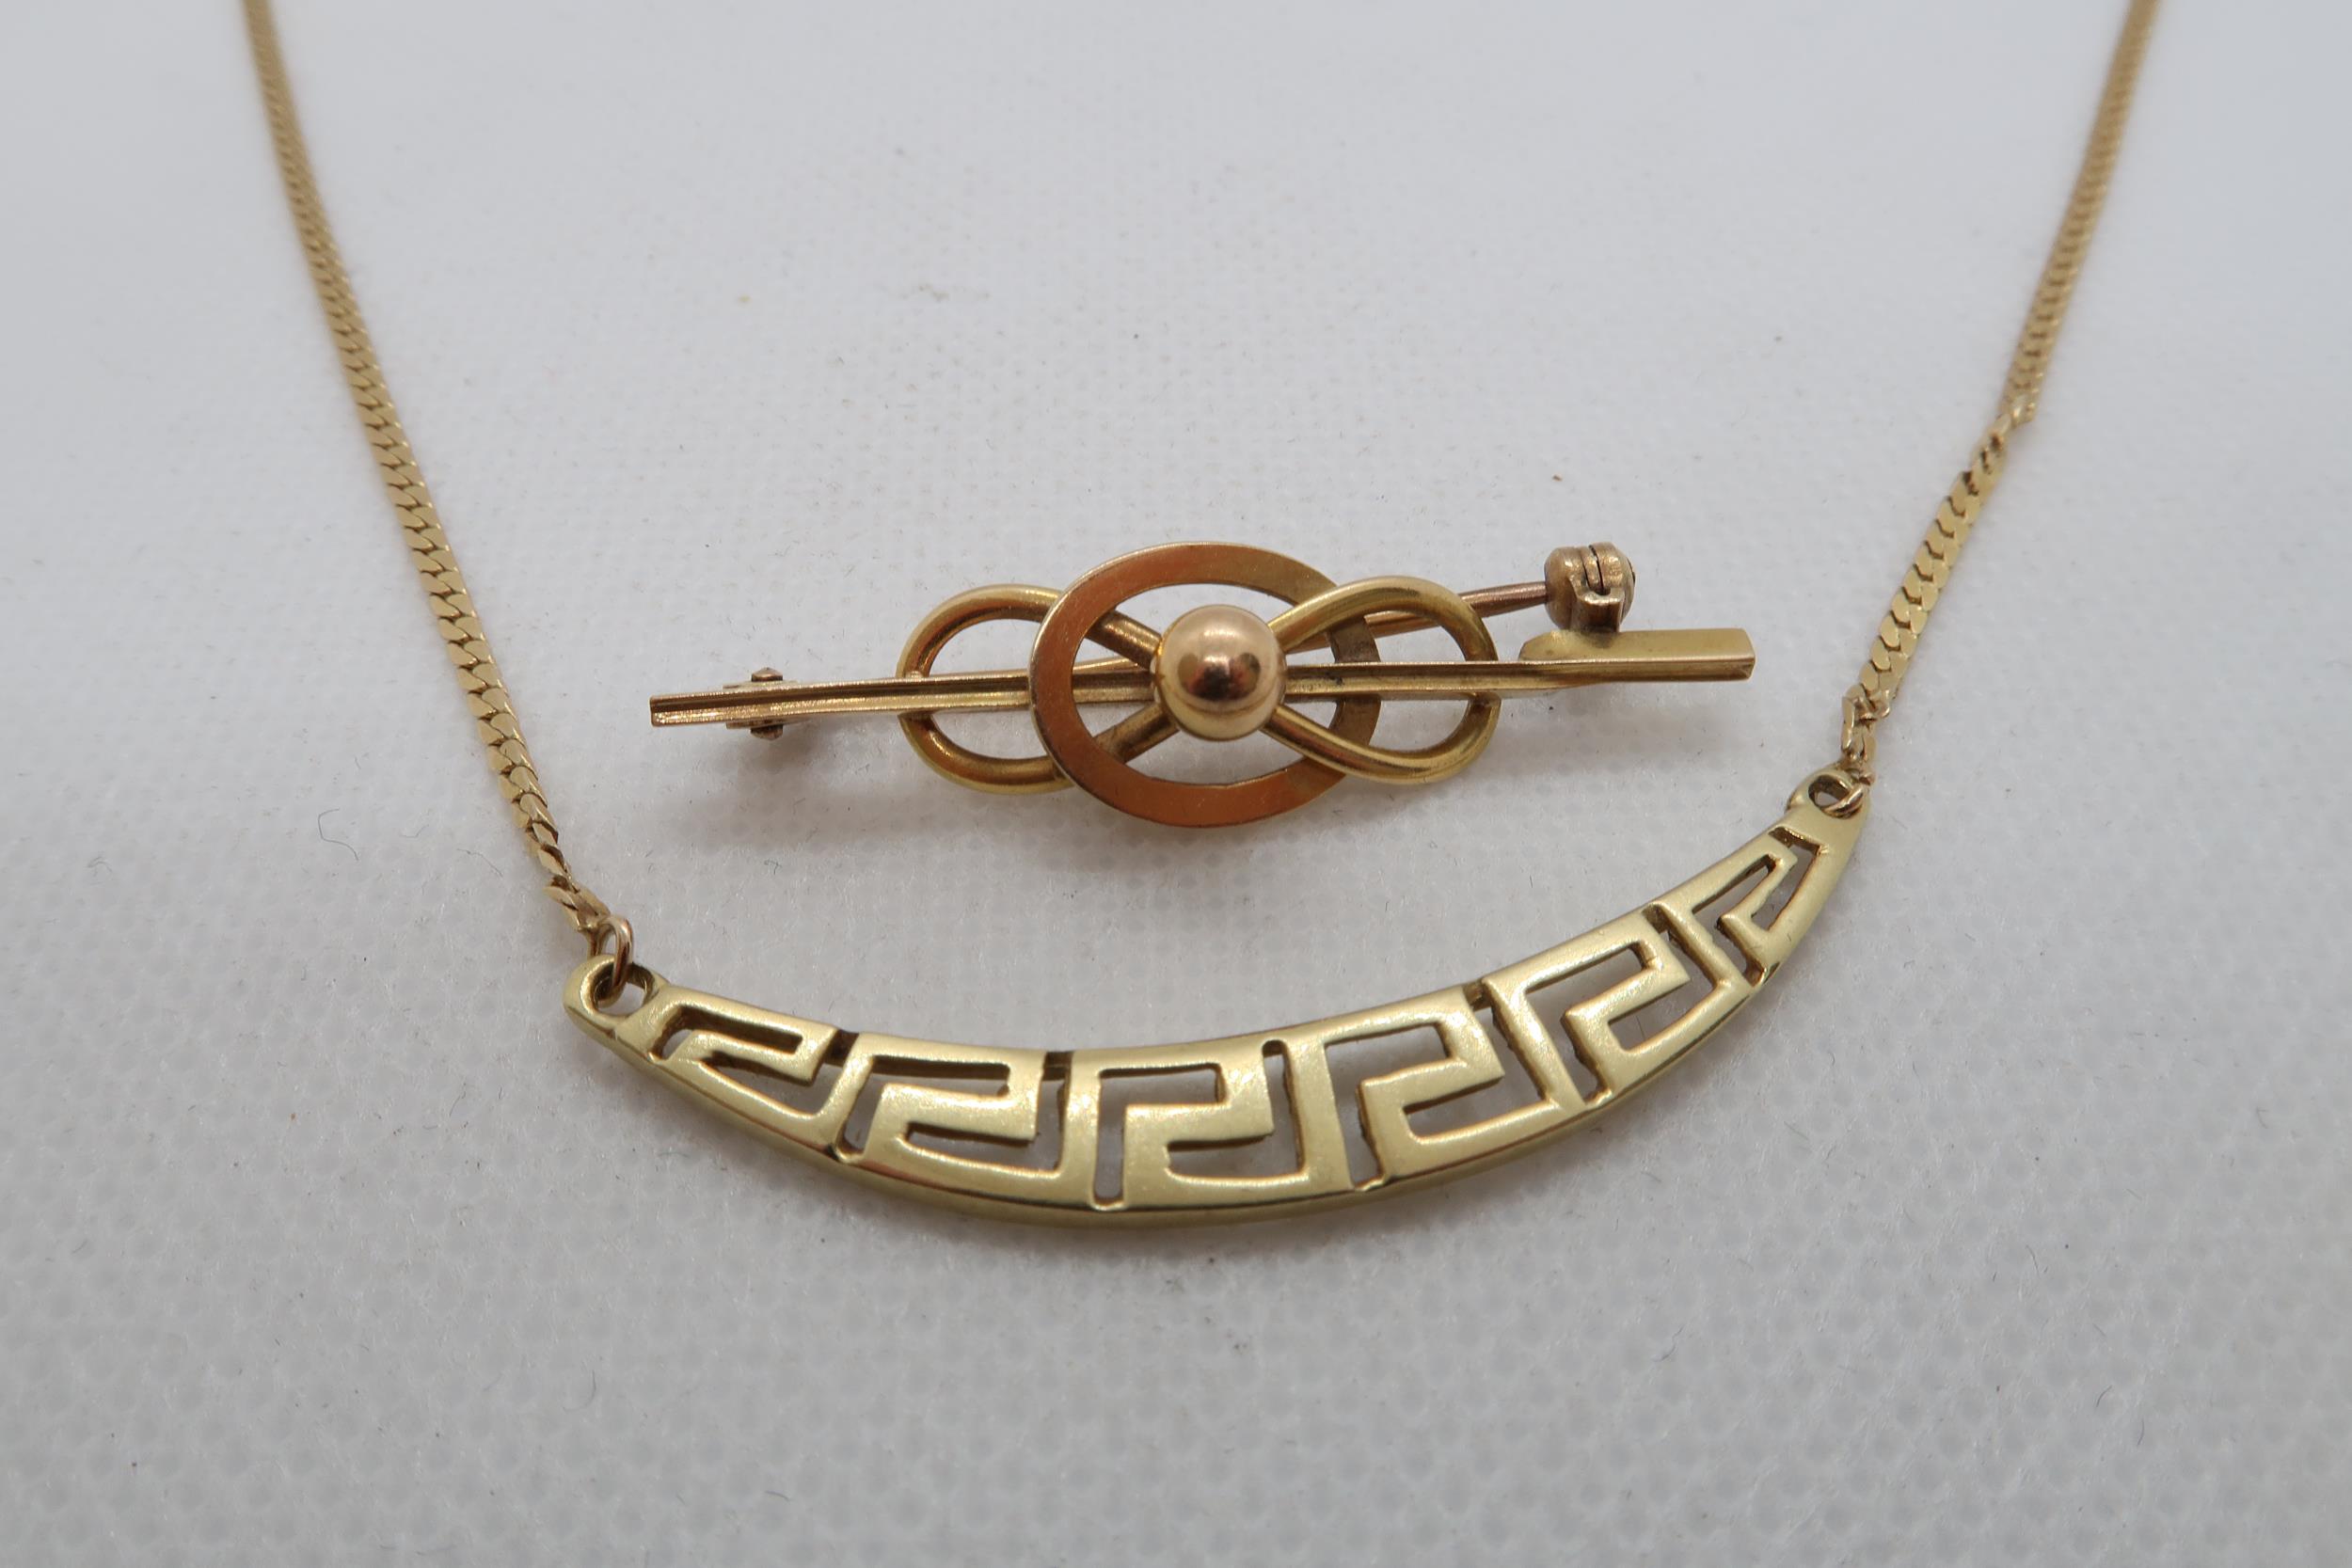 A 14ct yellow gold (hallmarked) necklace - 43cm - together with a 15ct yellow gold (hallmarked) - Image 2 of 2